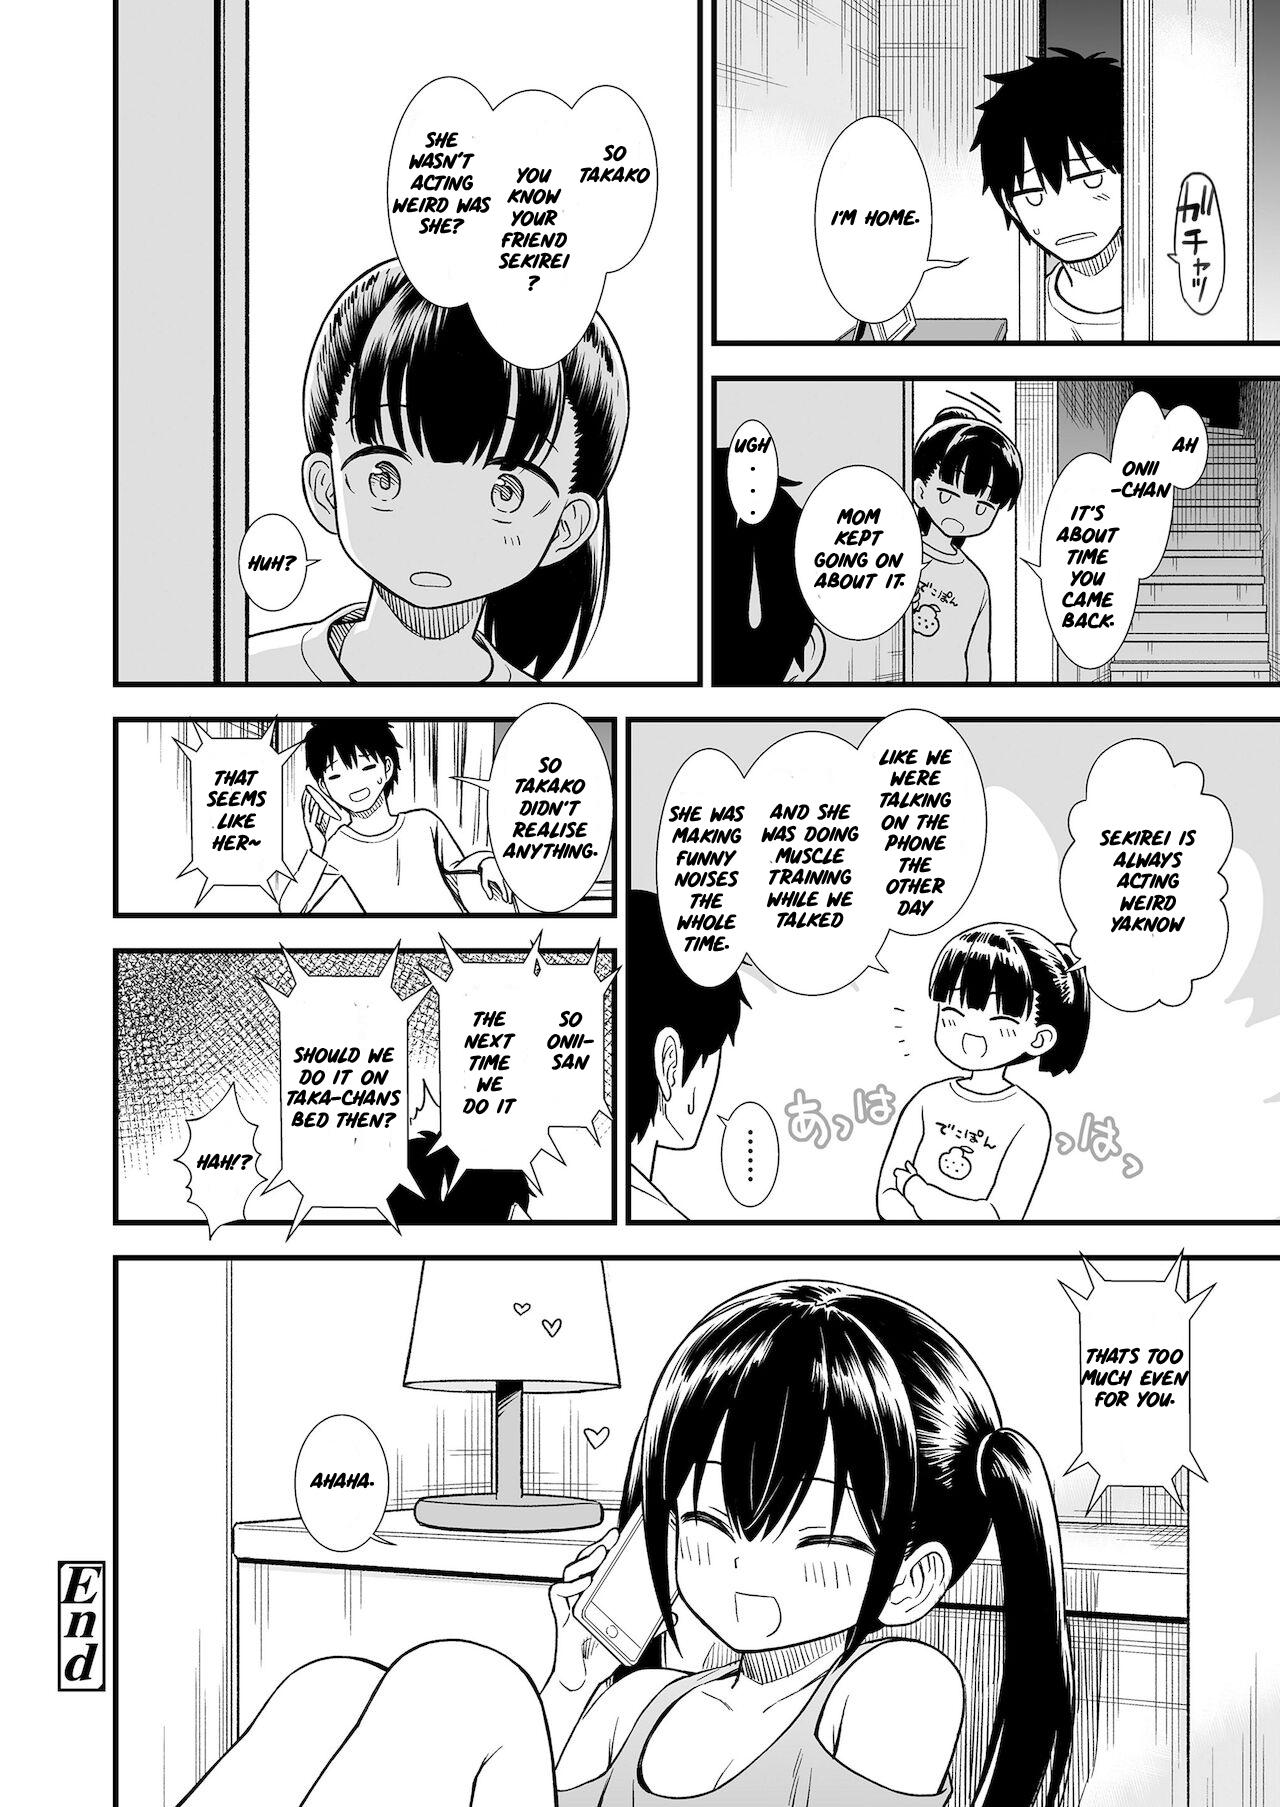 Tiny Imouto no Tomodachi Homecoming | My Little Sister's Friend Homecoming Cuck - Page 24